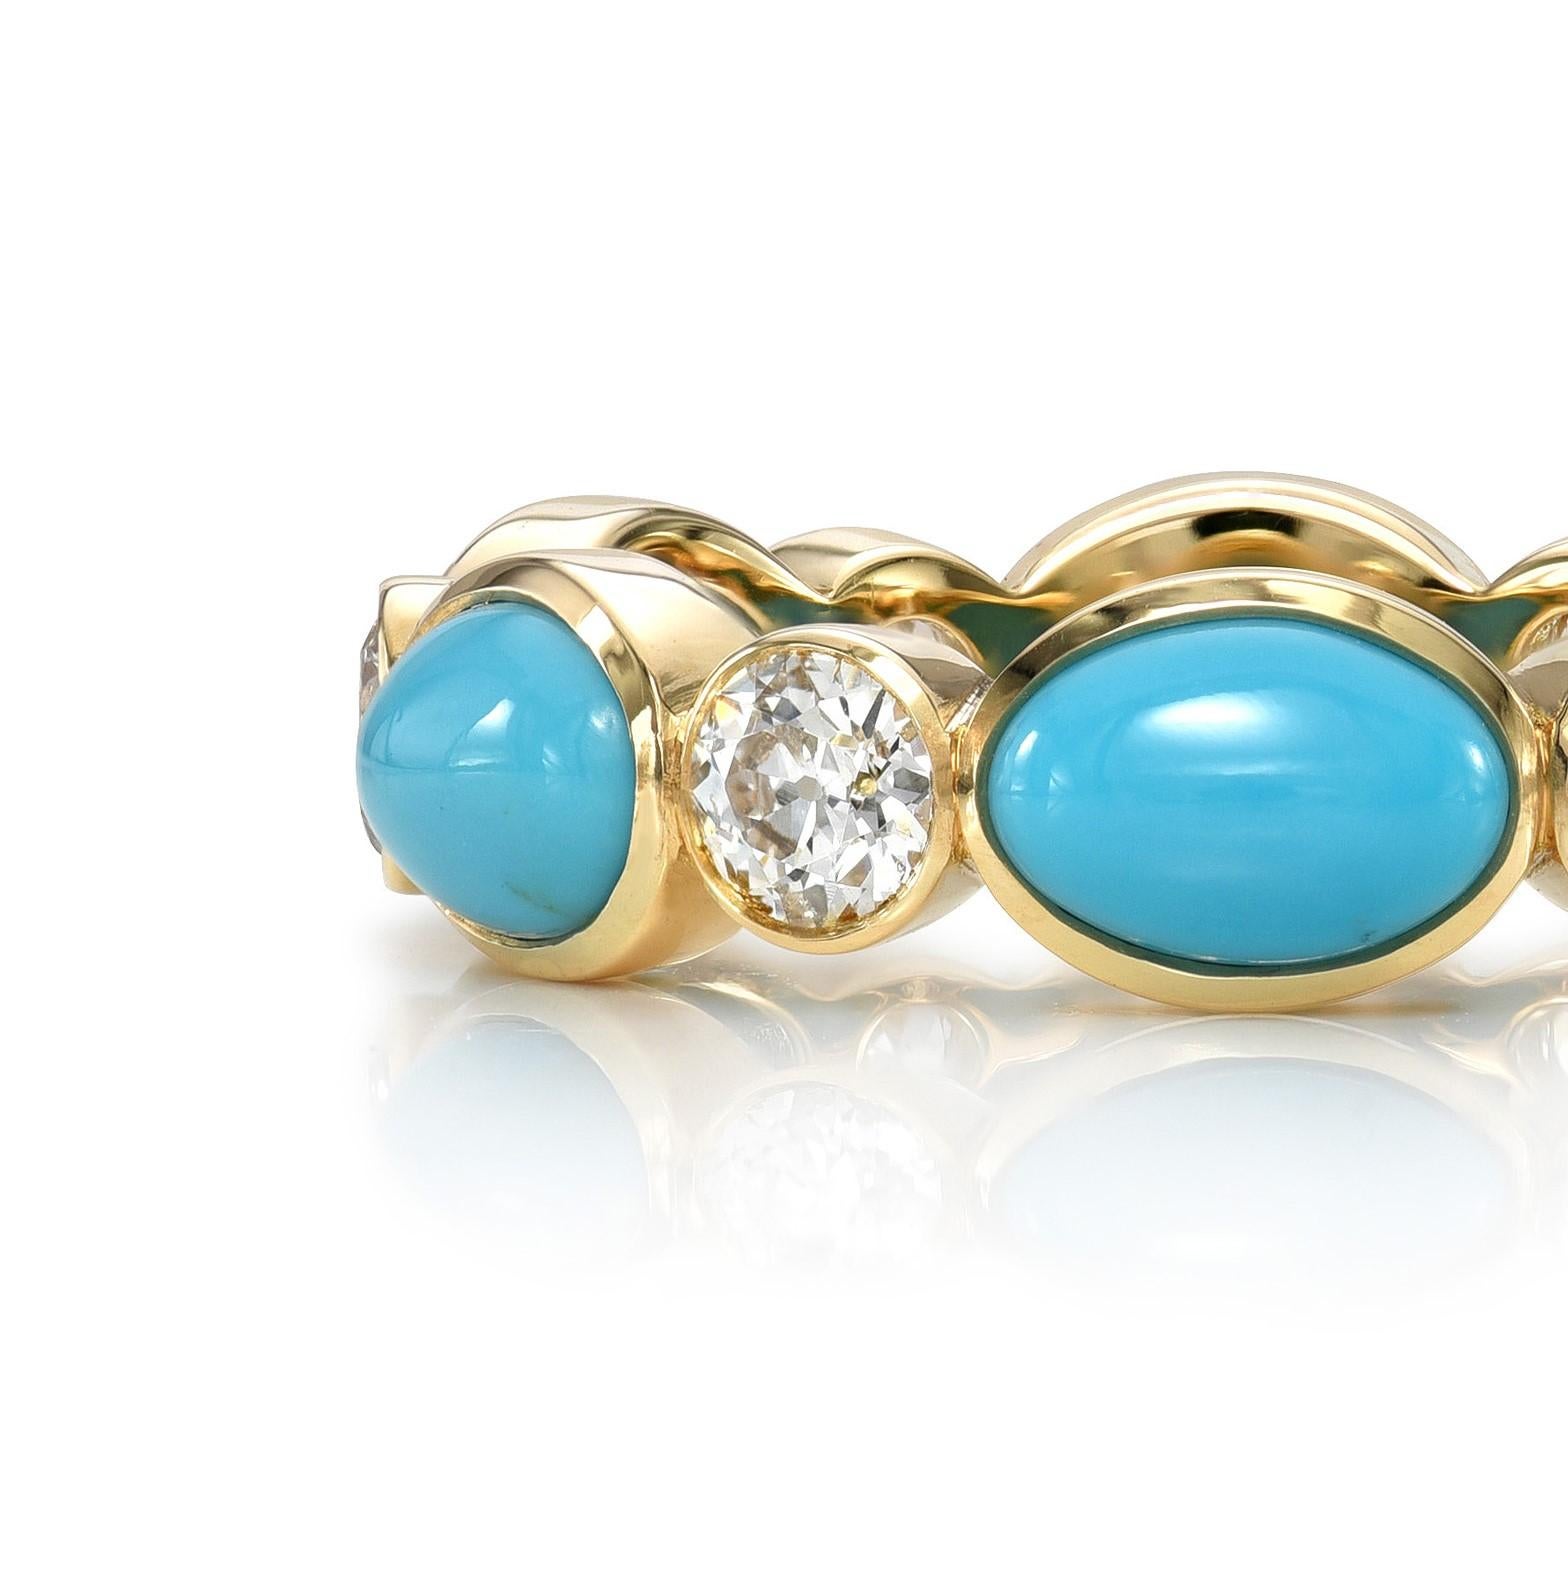 For Sale:  Handcrafted Quinn European Cut Diamond/Turquoise Eternity Band by Single Stone 2